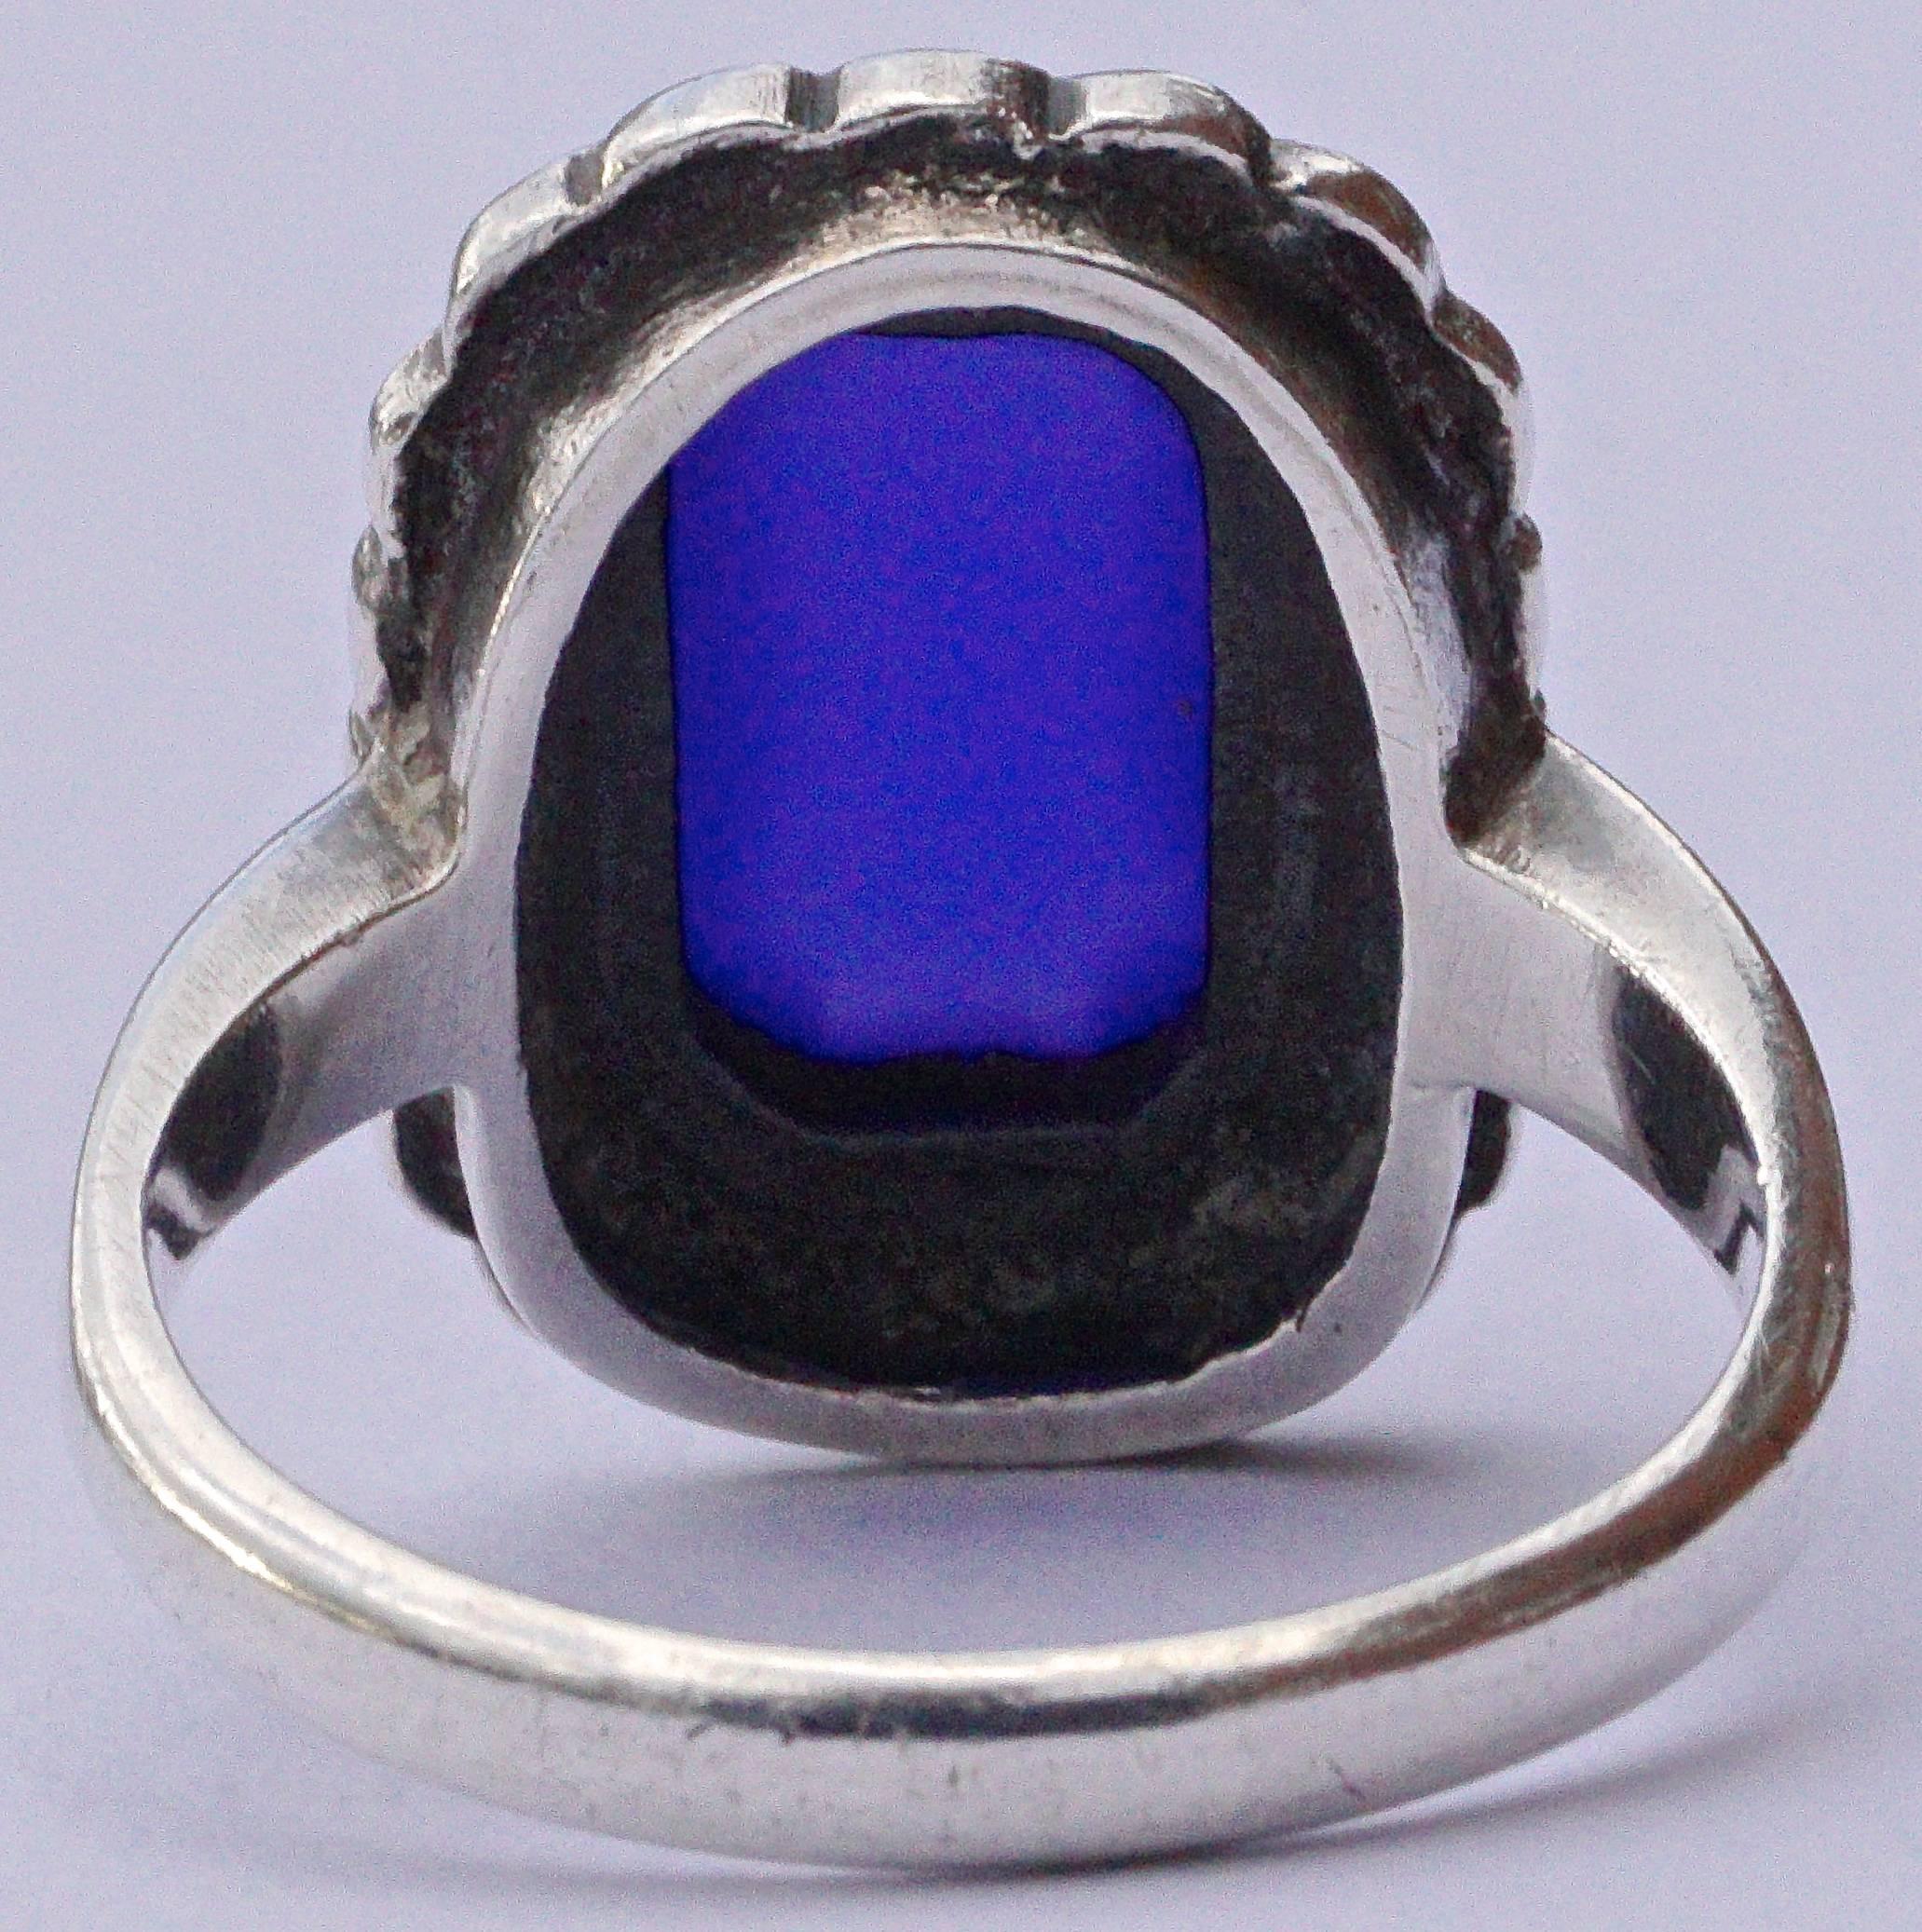 Art deco silver ring with a row of marcasites surrounding a beautiful blue chalcedony. Ring size UK K, US 5 1/4. The front measures 1.7cm, .7 inches x 1.3cm, .5 inches and the setting is depth 6mm, .2 inch. The inside band is stamped SILVER.

This